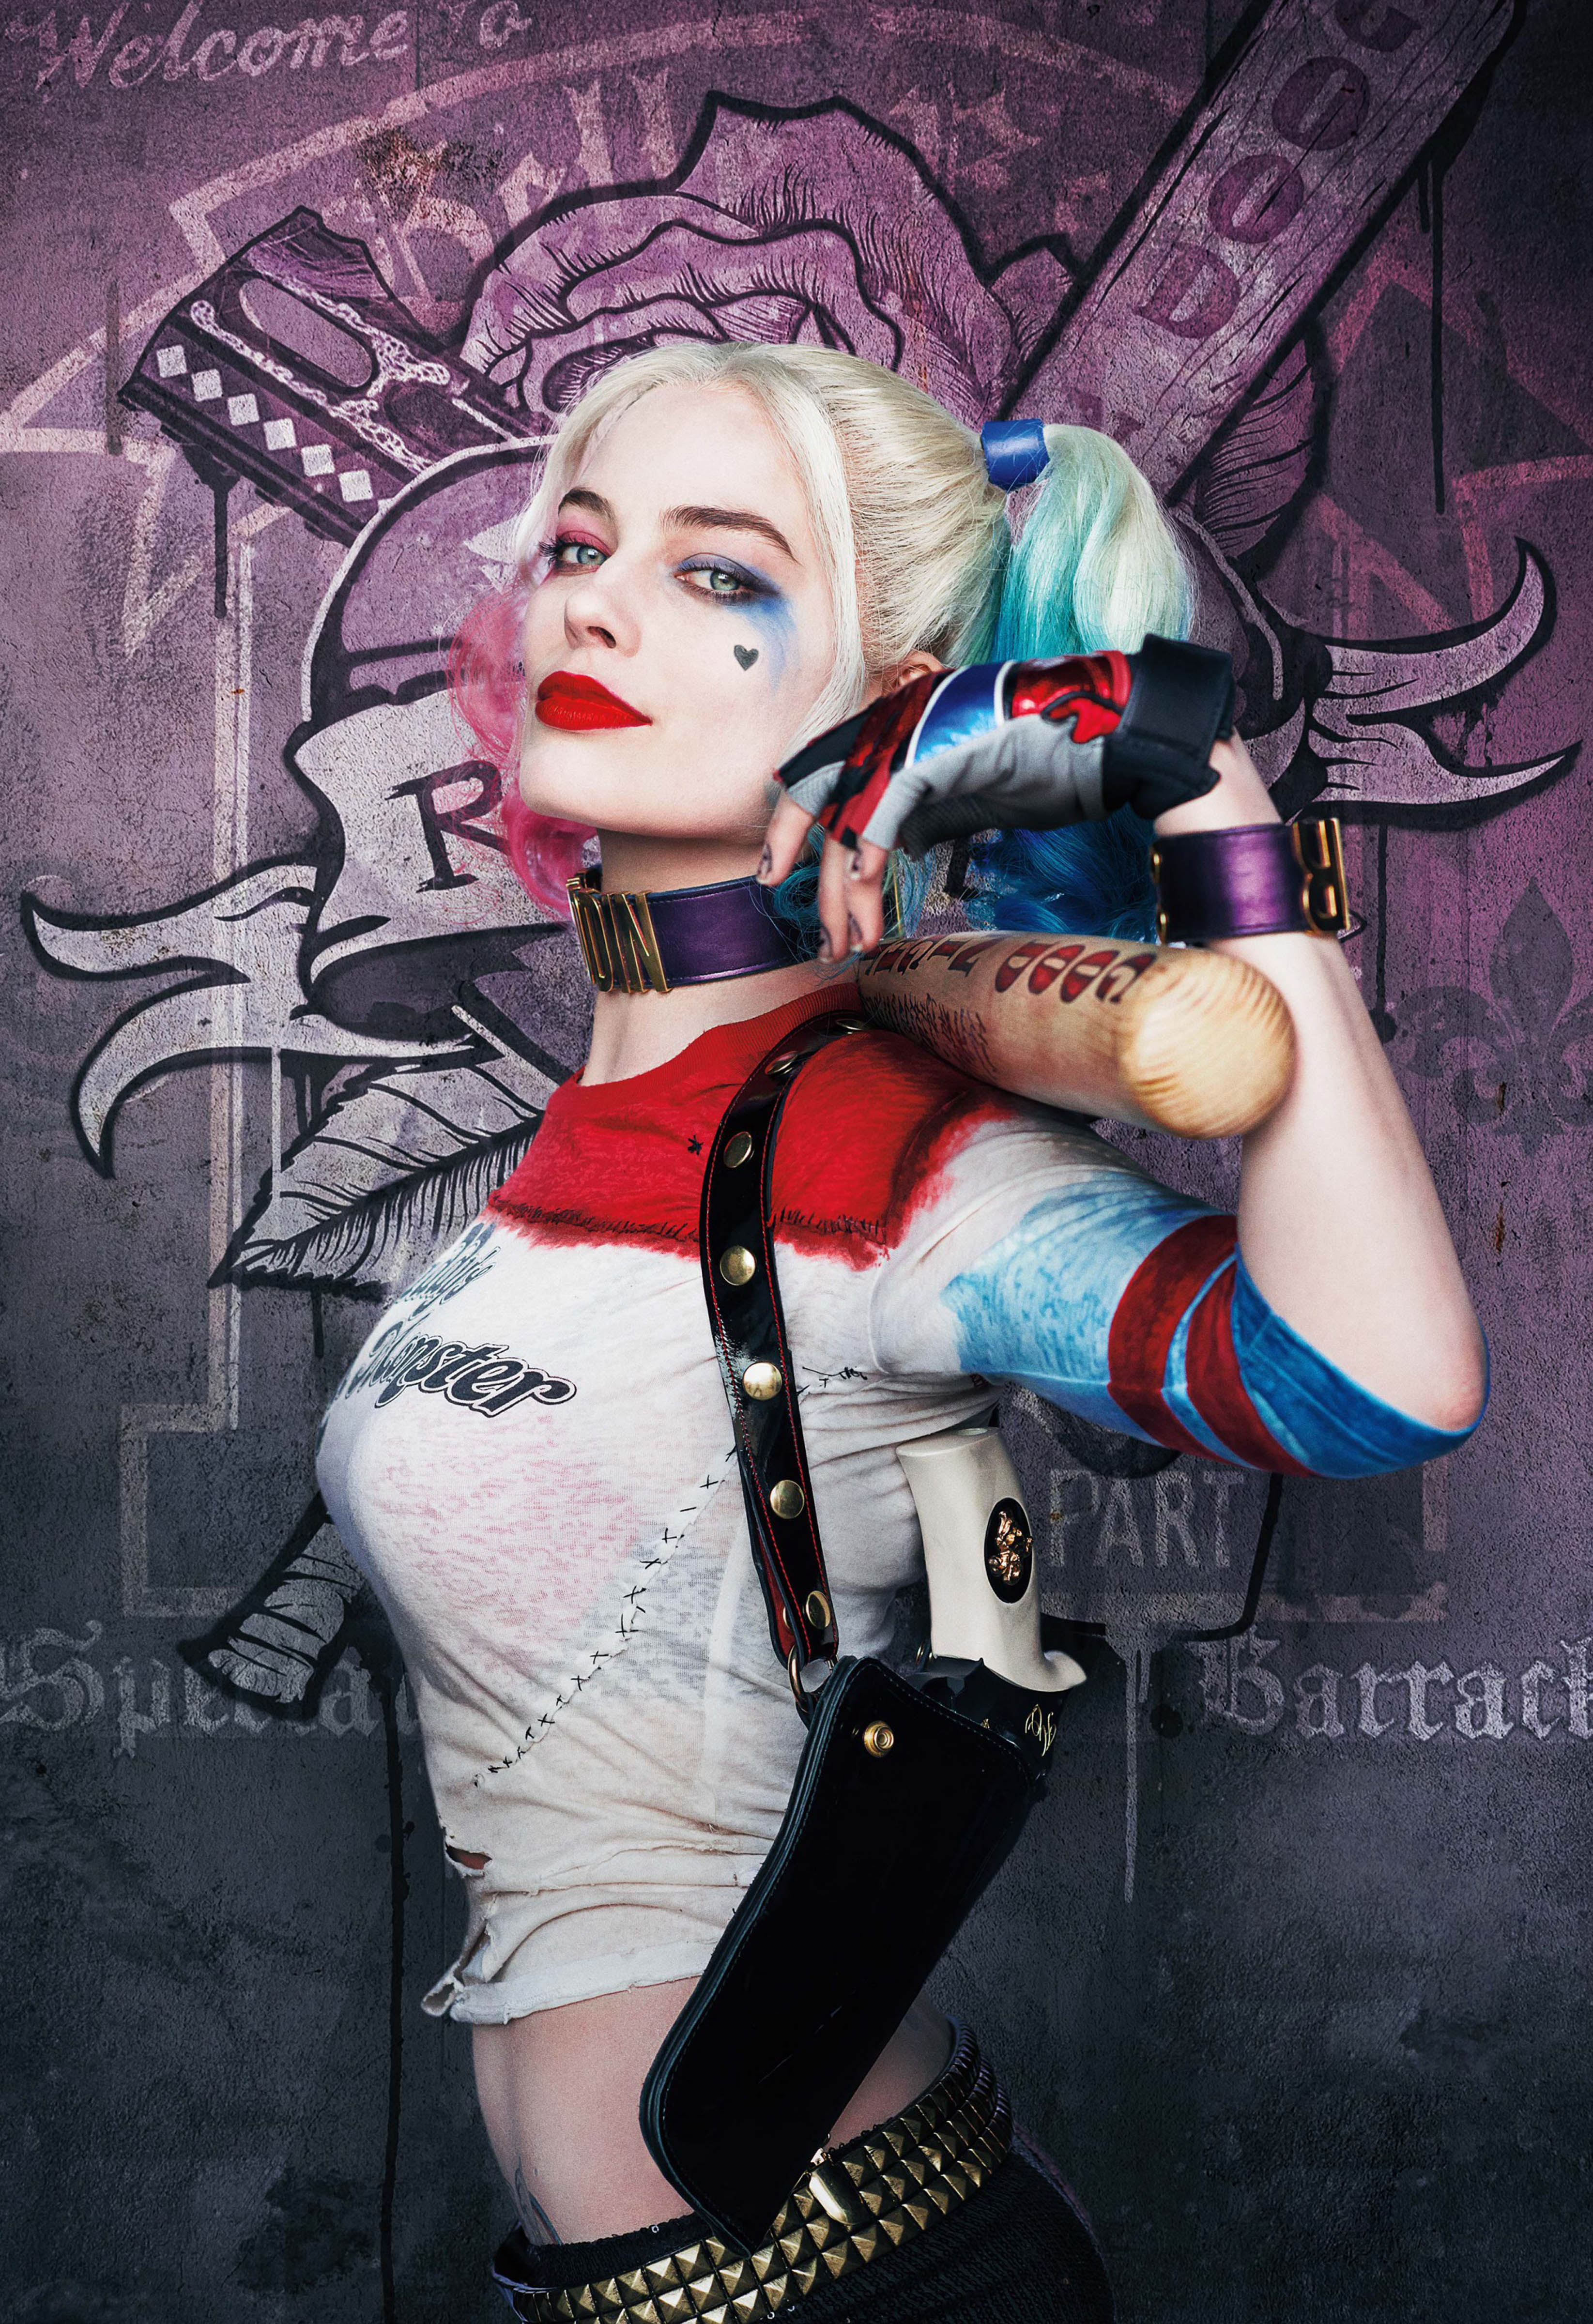 adriana roque recommends Harley Quinn Sex Outfit